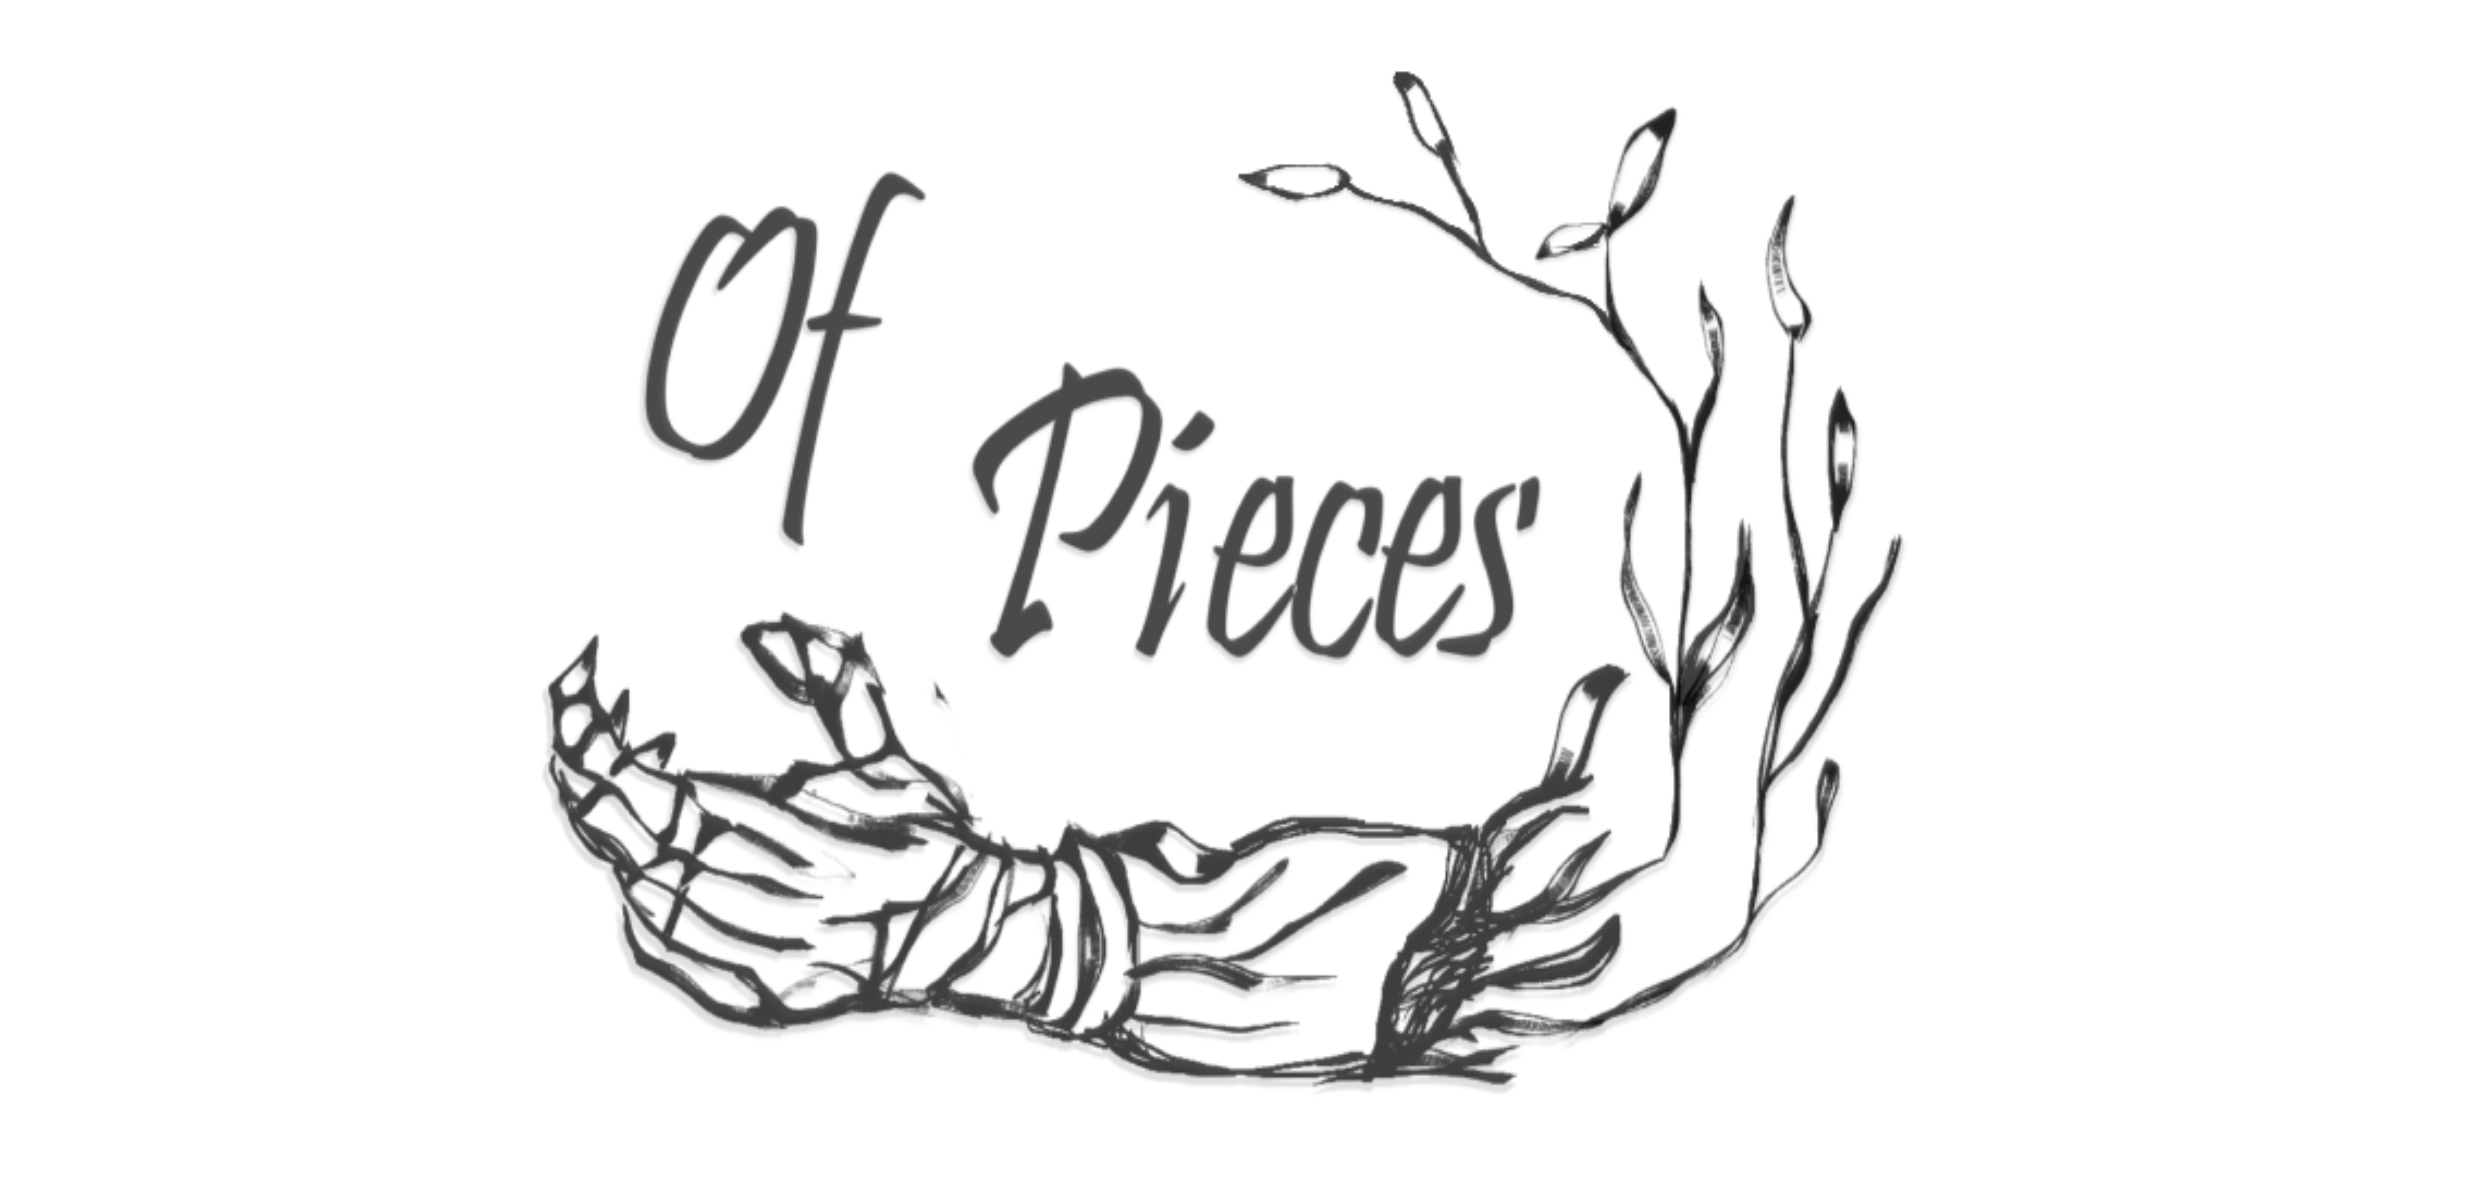 Of Pieces